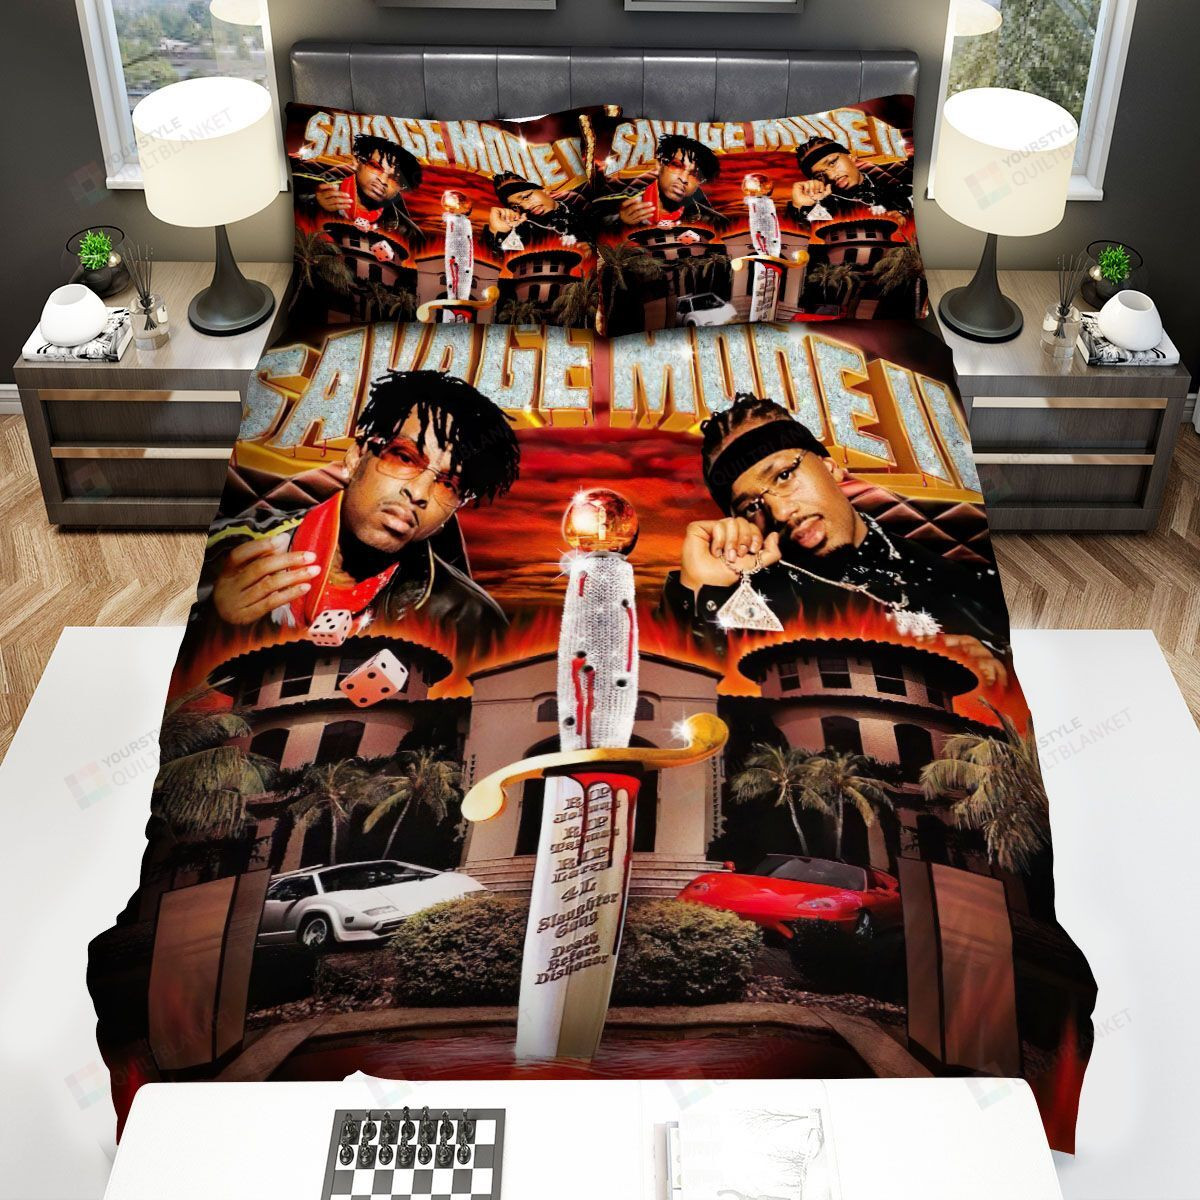 21 Savage Savage Mode Ii Album Cover Bed Sheets Spread Comforter Duvet Cover Bedding Sets